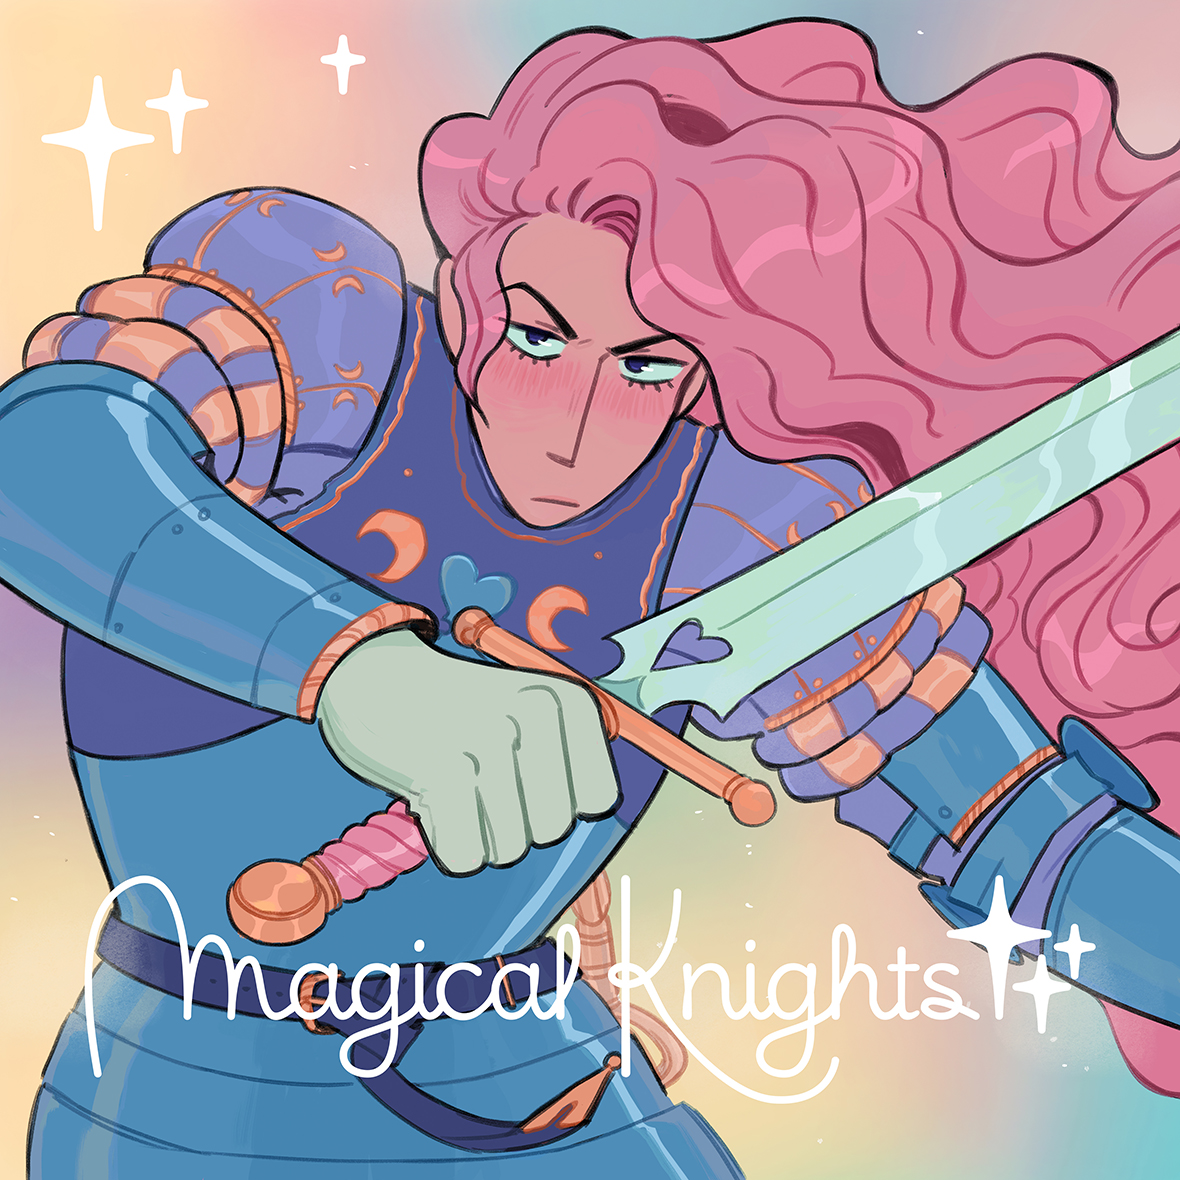 Announcing today our new project: ✨ Magical Knights ✨ An artbook about magical girls... But with swords! Kickstarter on July 11th 💜